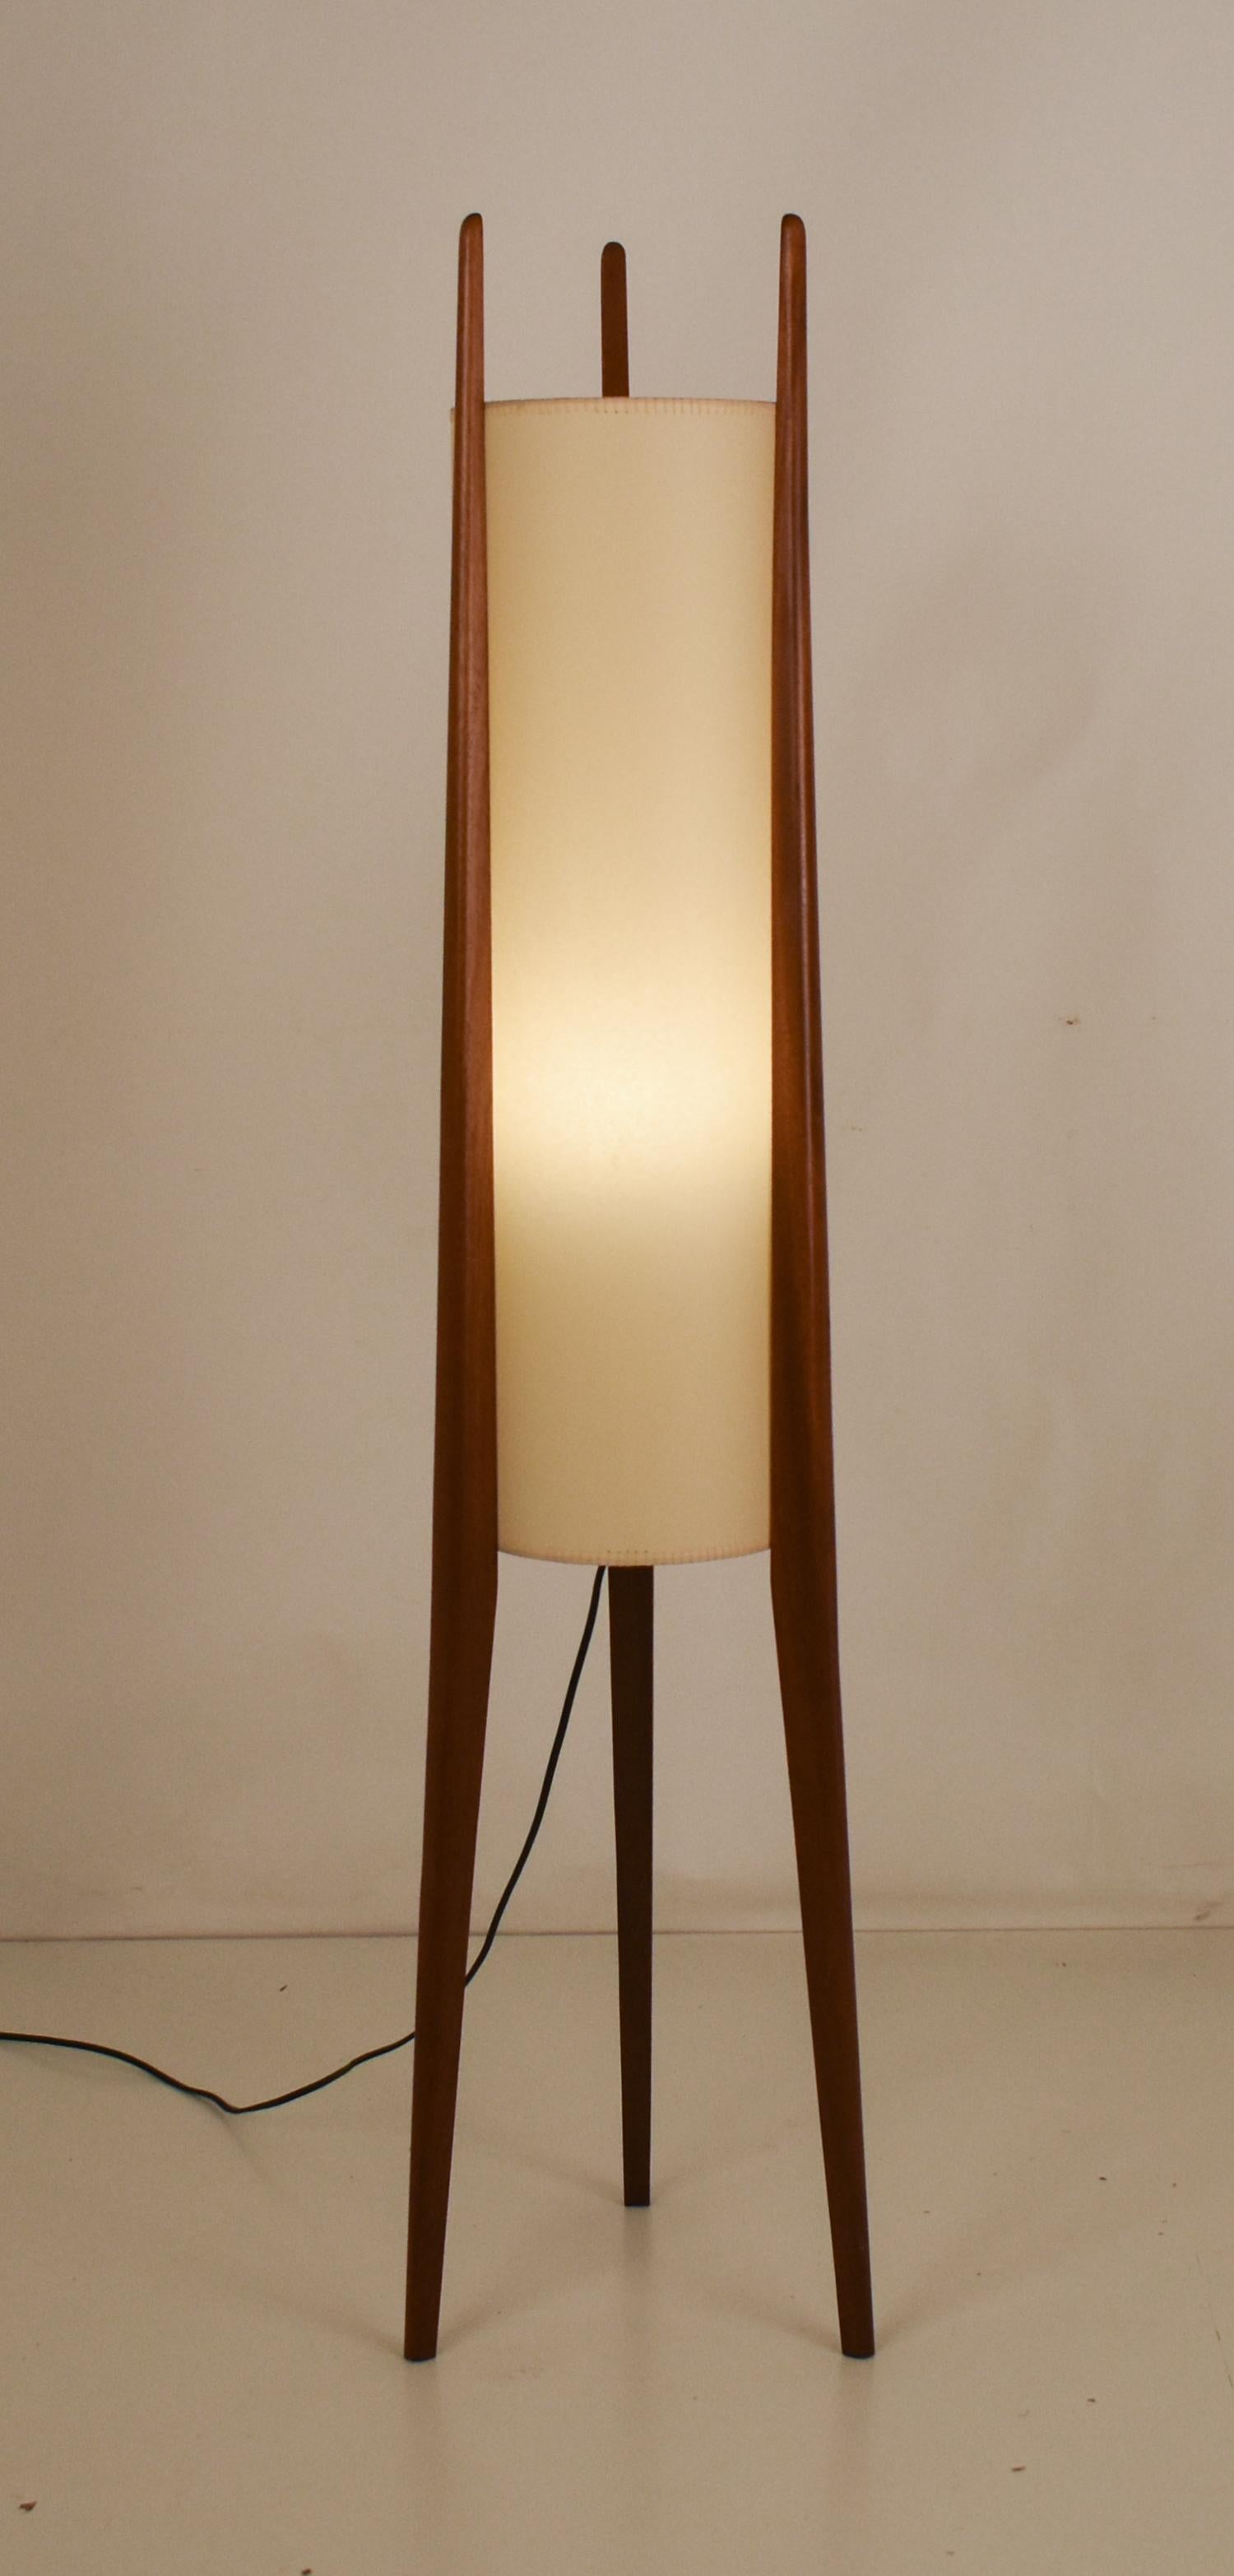 how to make a floor lamp taller